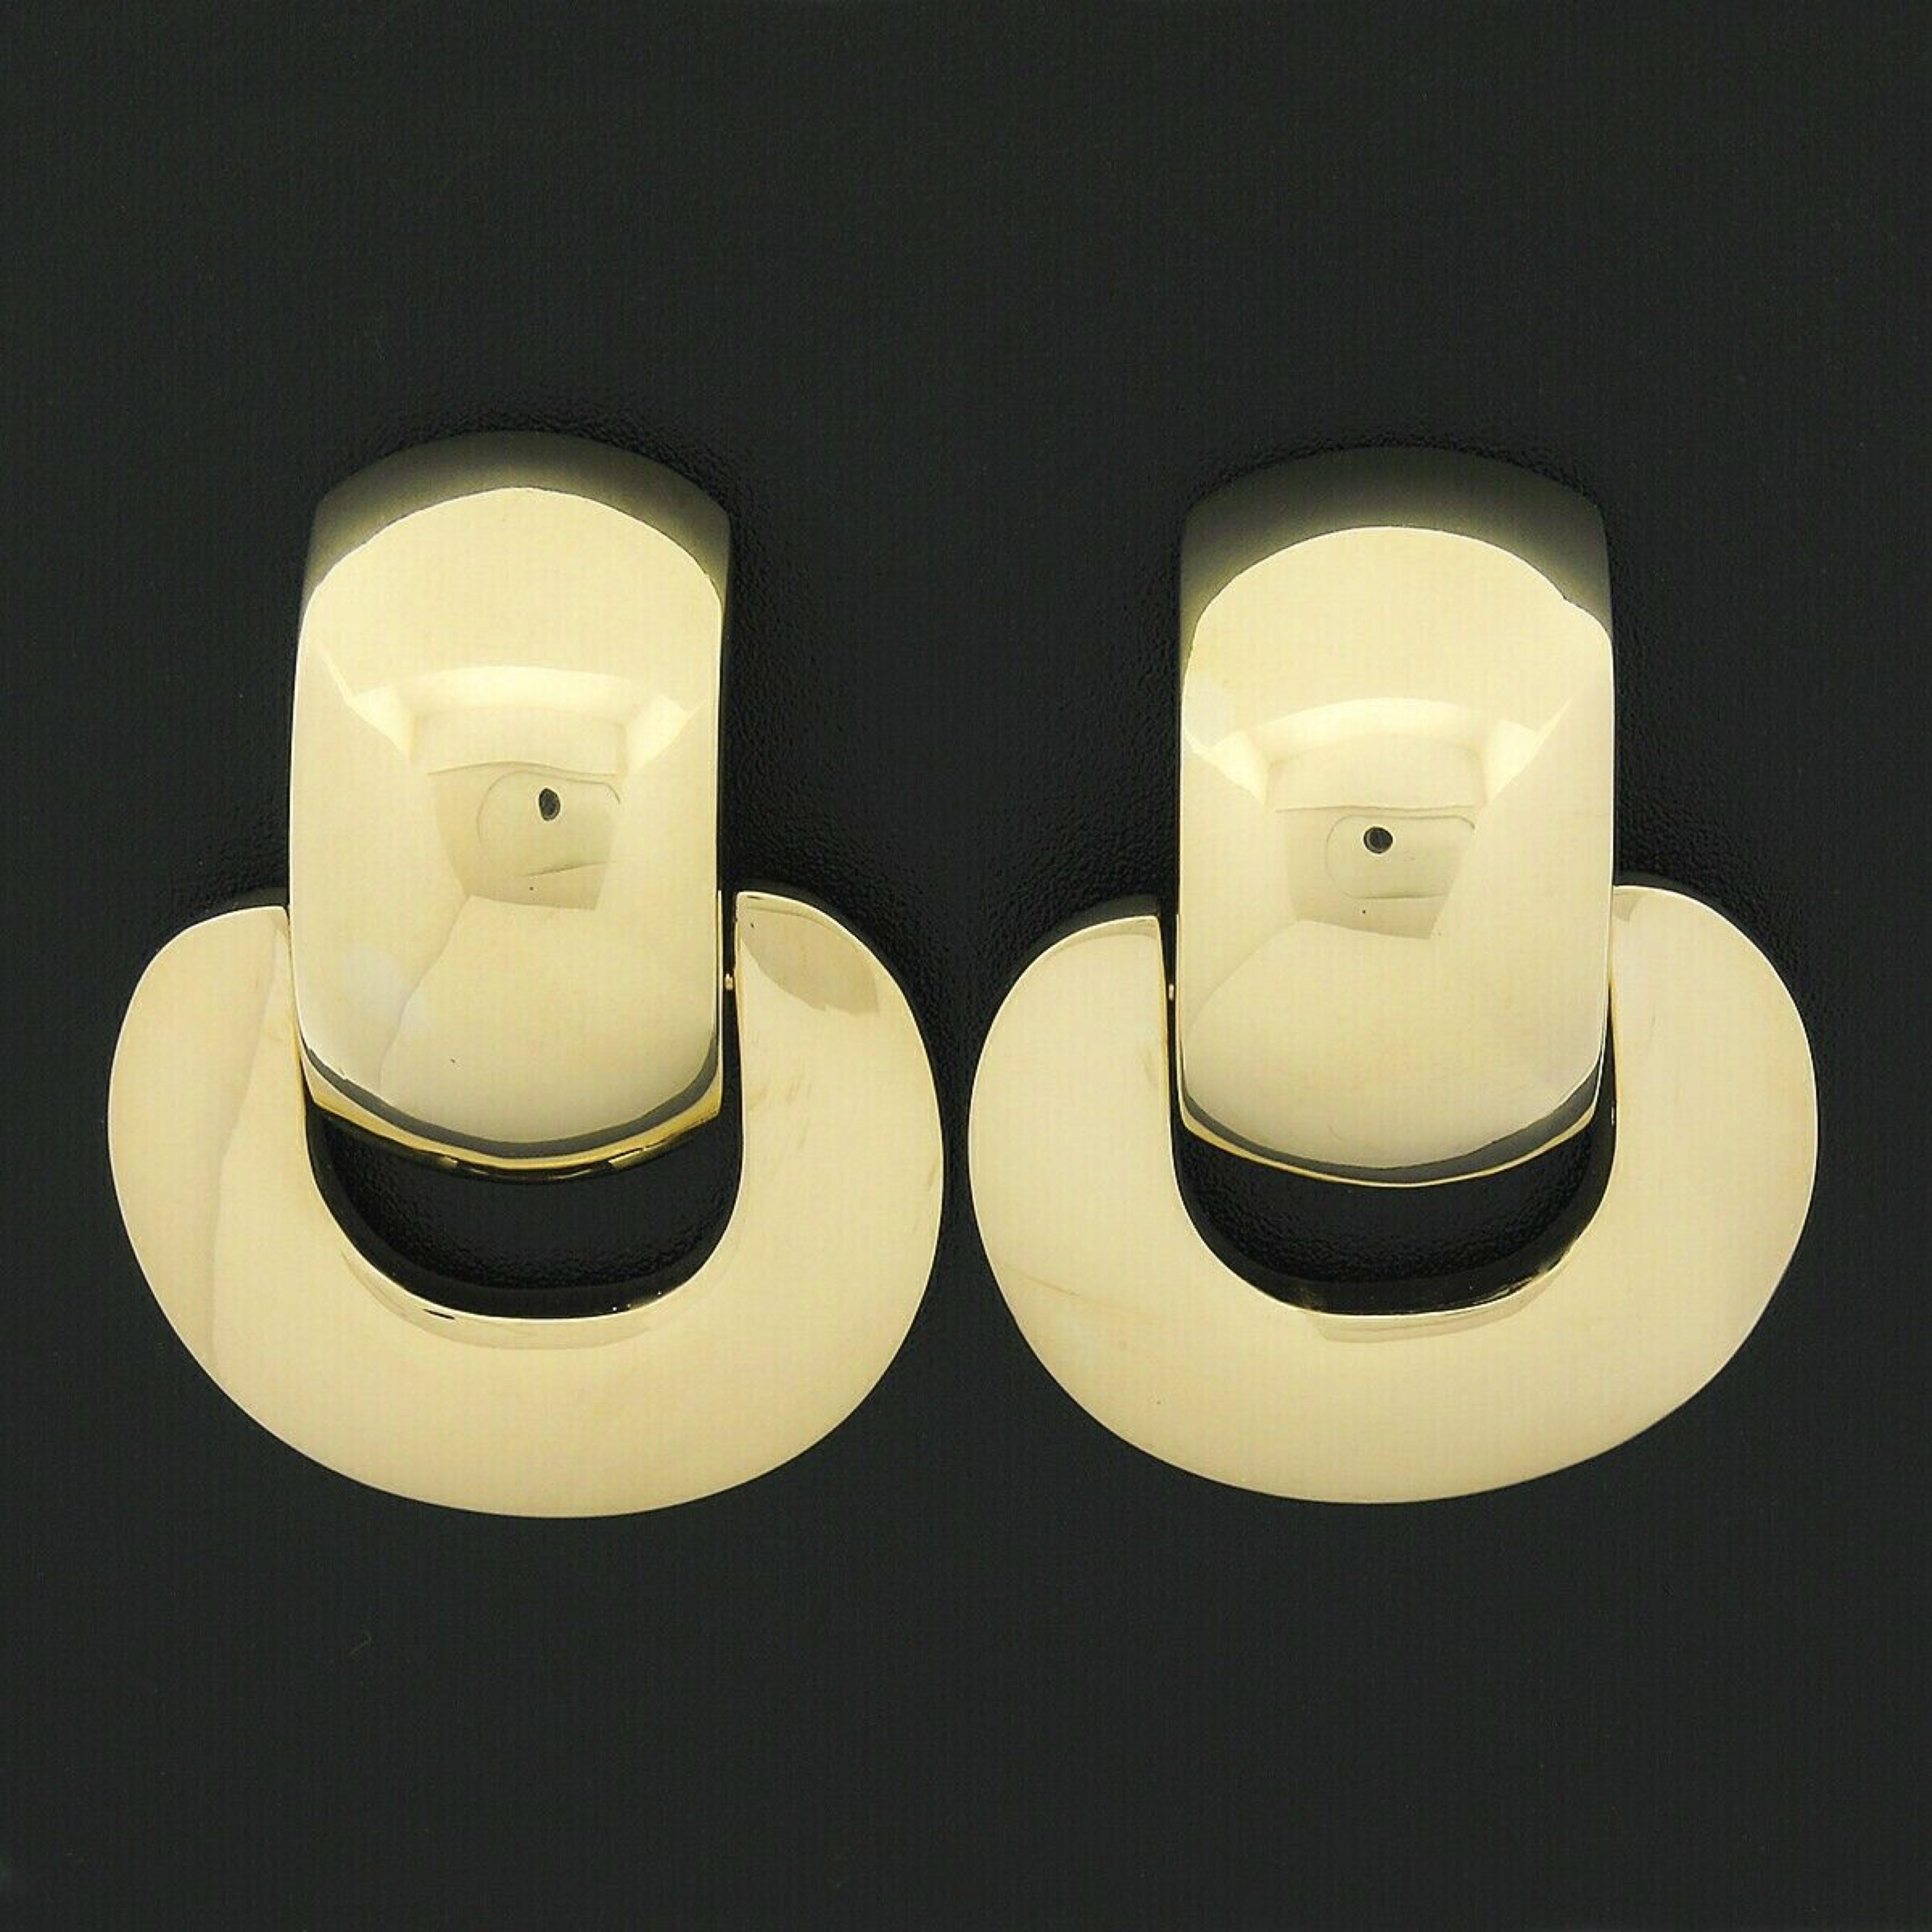 These outstanding statement earrings are crafted in solid 18k yellow gold and feature a large door knocker design with wonderful high polished finish throughout, giving them their super shiny and attractive appearance. The bottom portion elegantly